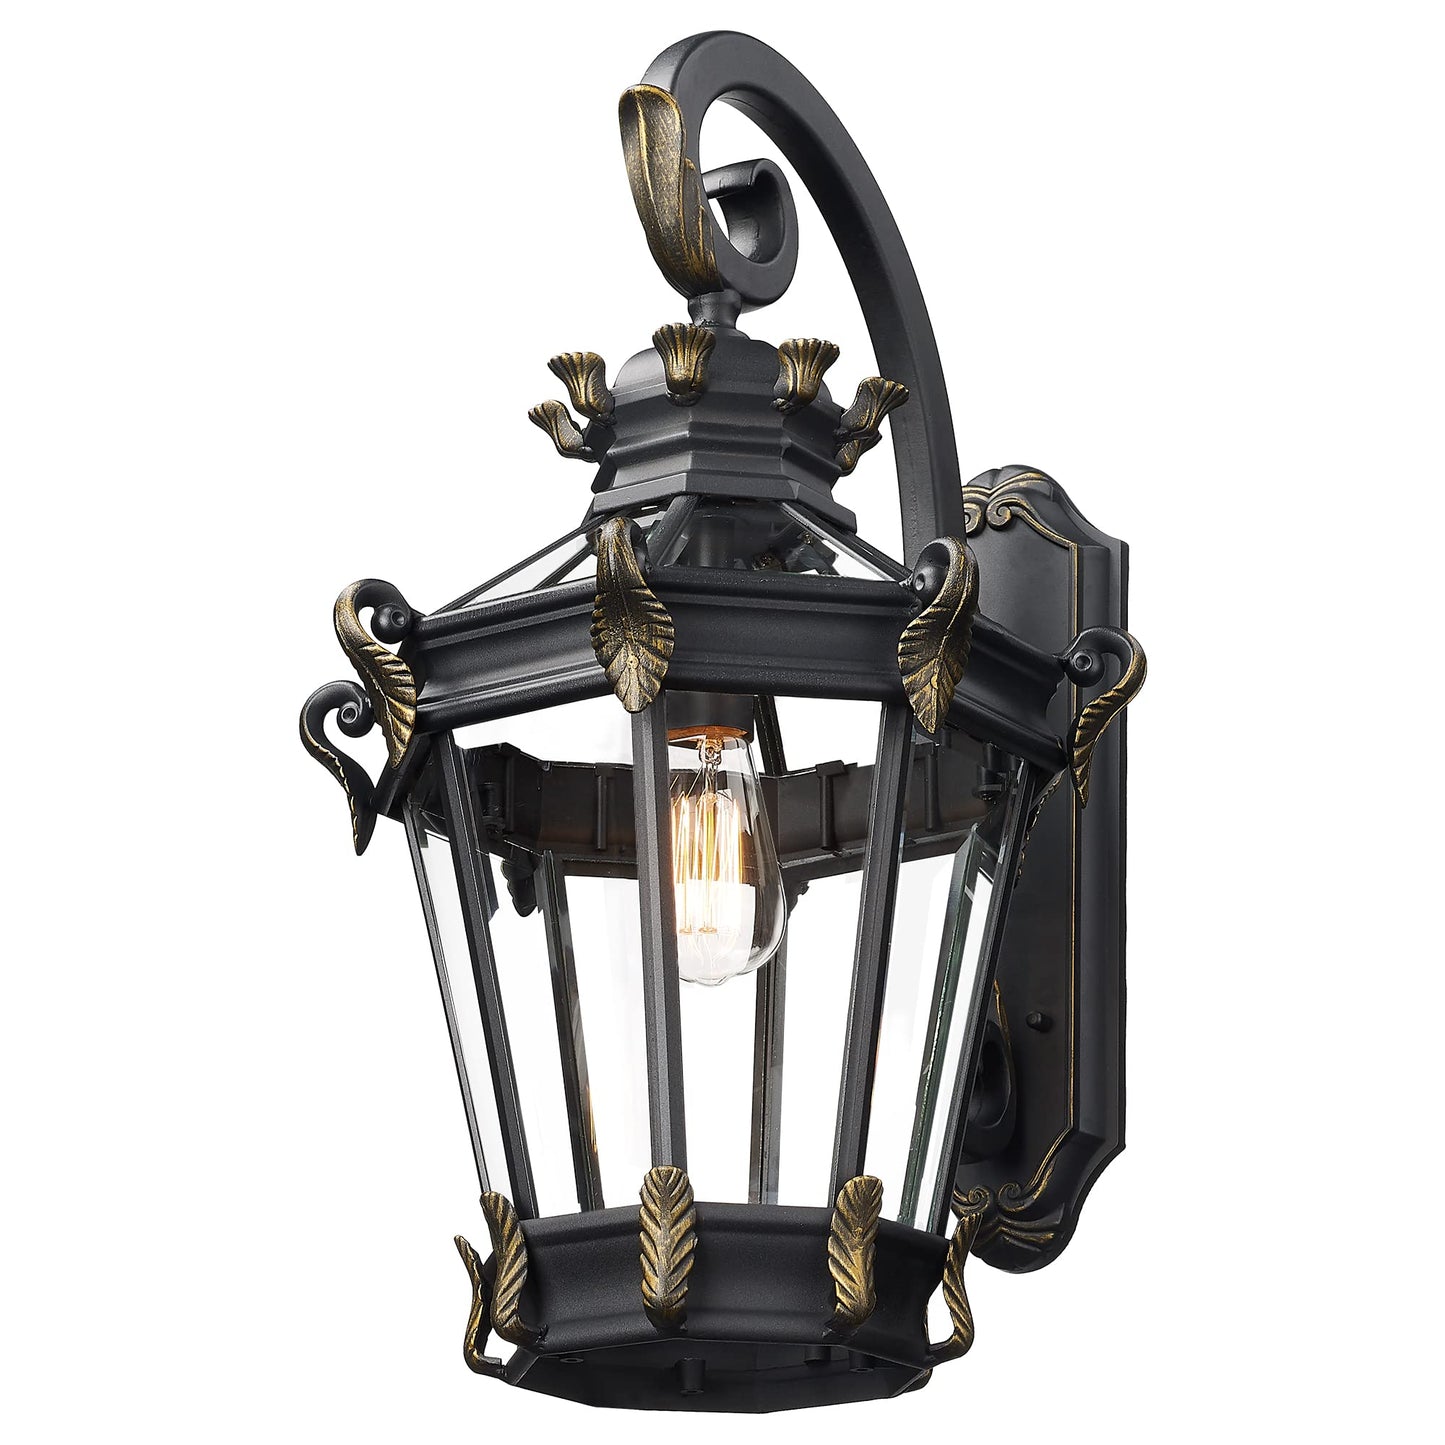 
                  
                    Emliviar Farmhouse Large Outdoor Wall Light, 24.4" Vintage Rustic Exterior Porch Light with Clear Glass for House Patio, Die-Cast Aluminum in Black Finish, XE267B BG
                  
                